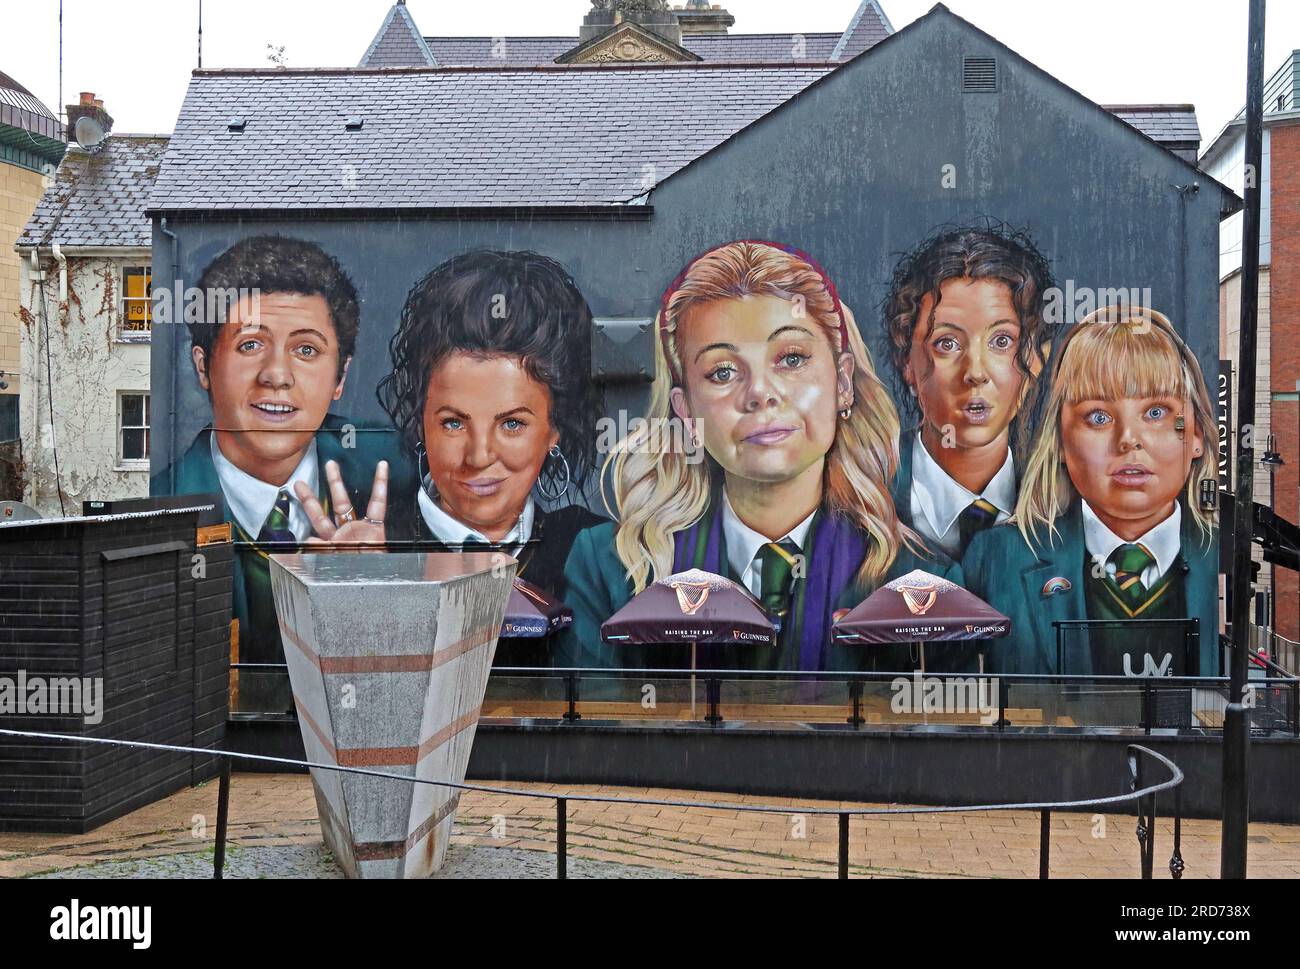 The Derry Girls mural, Londonderry walled city, 18 Orchard St, Derry, Londonderry, Ulster, Northern Ireland, UK, BT48 6EG Stock Photo